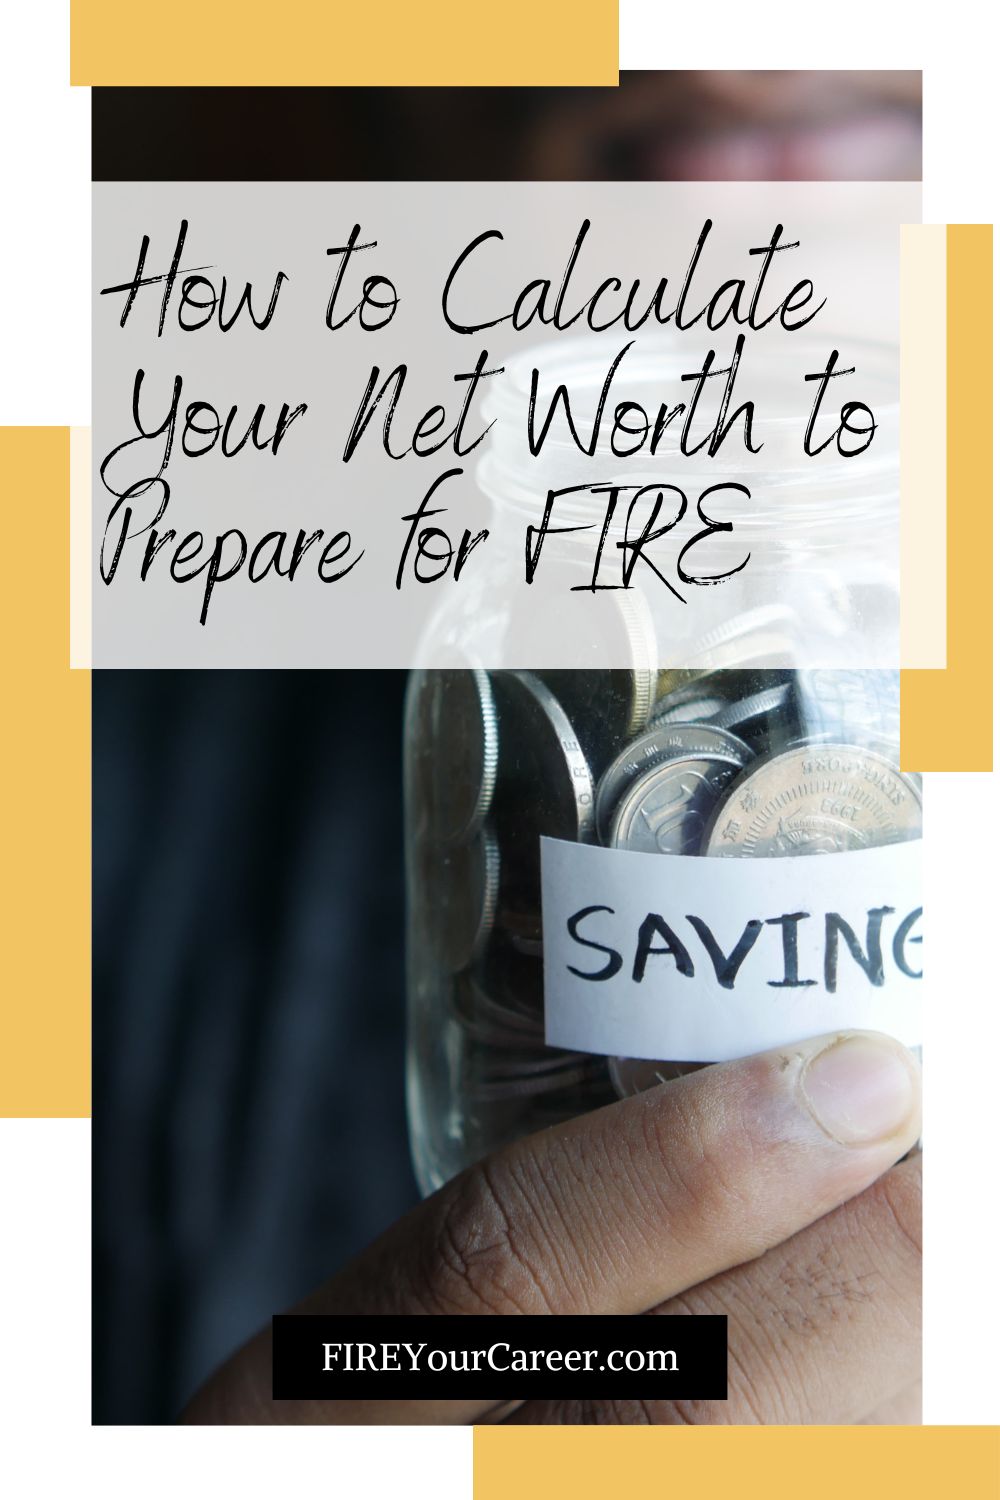 V2 How to Calculate Your Net Worth to Prepare for FIRE Pinterest